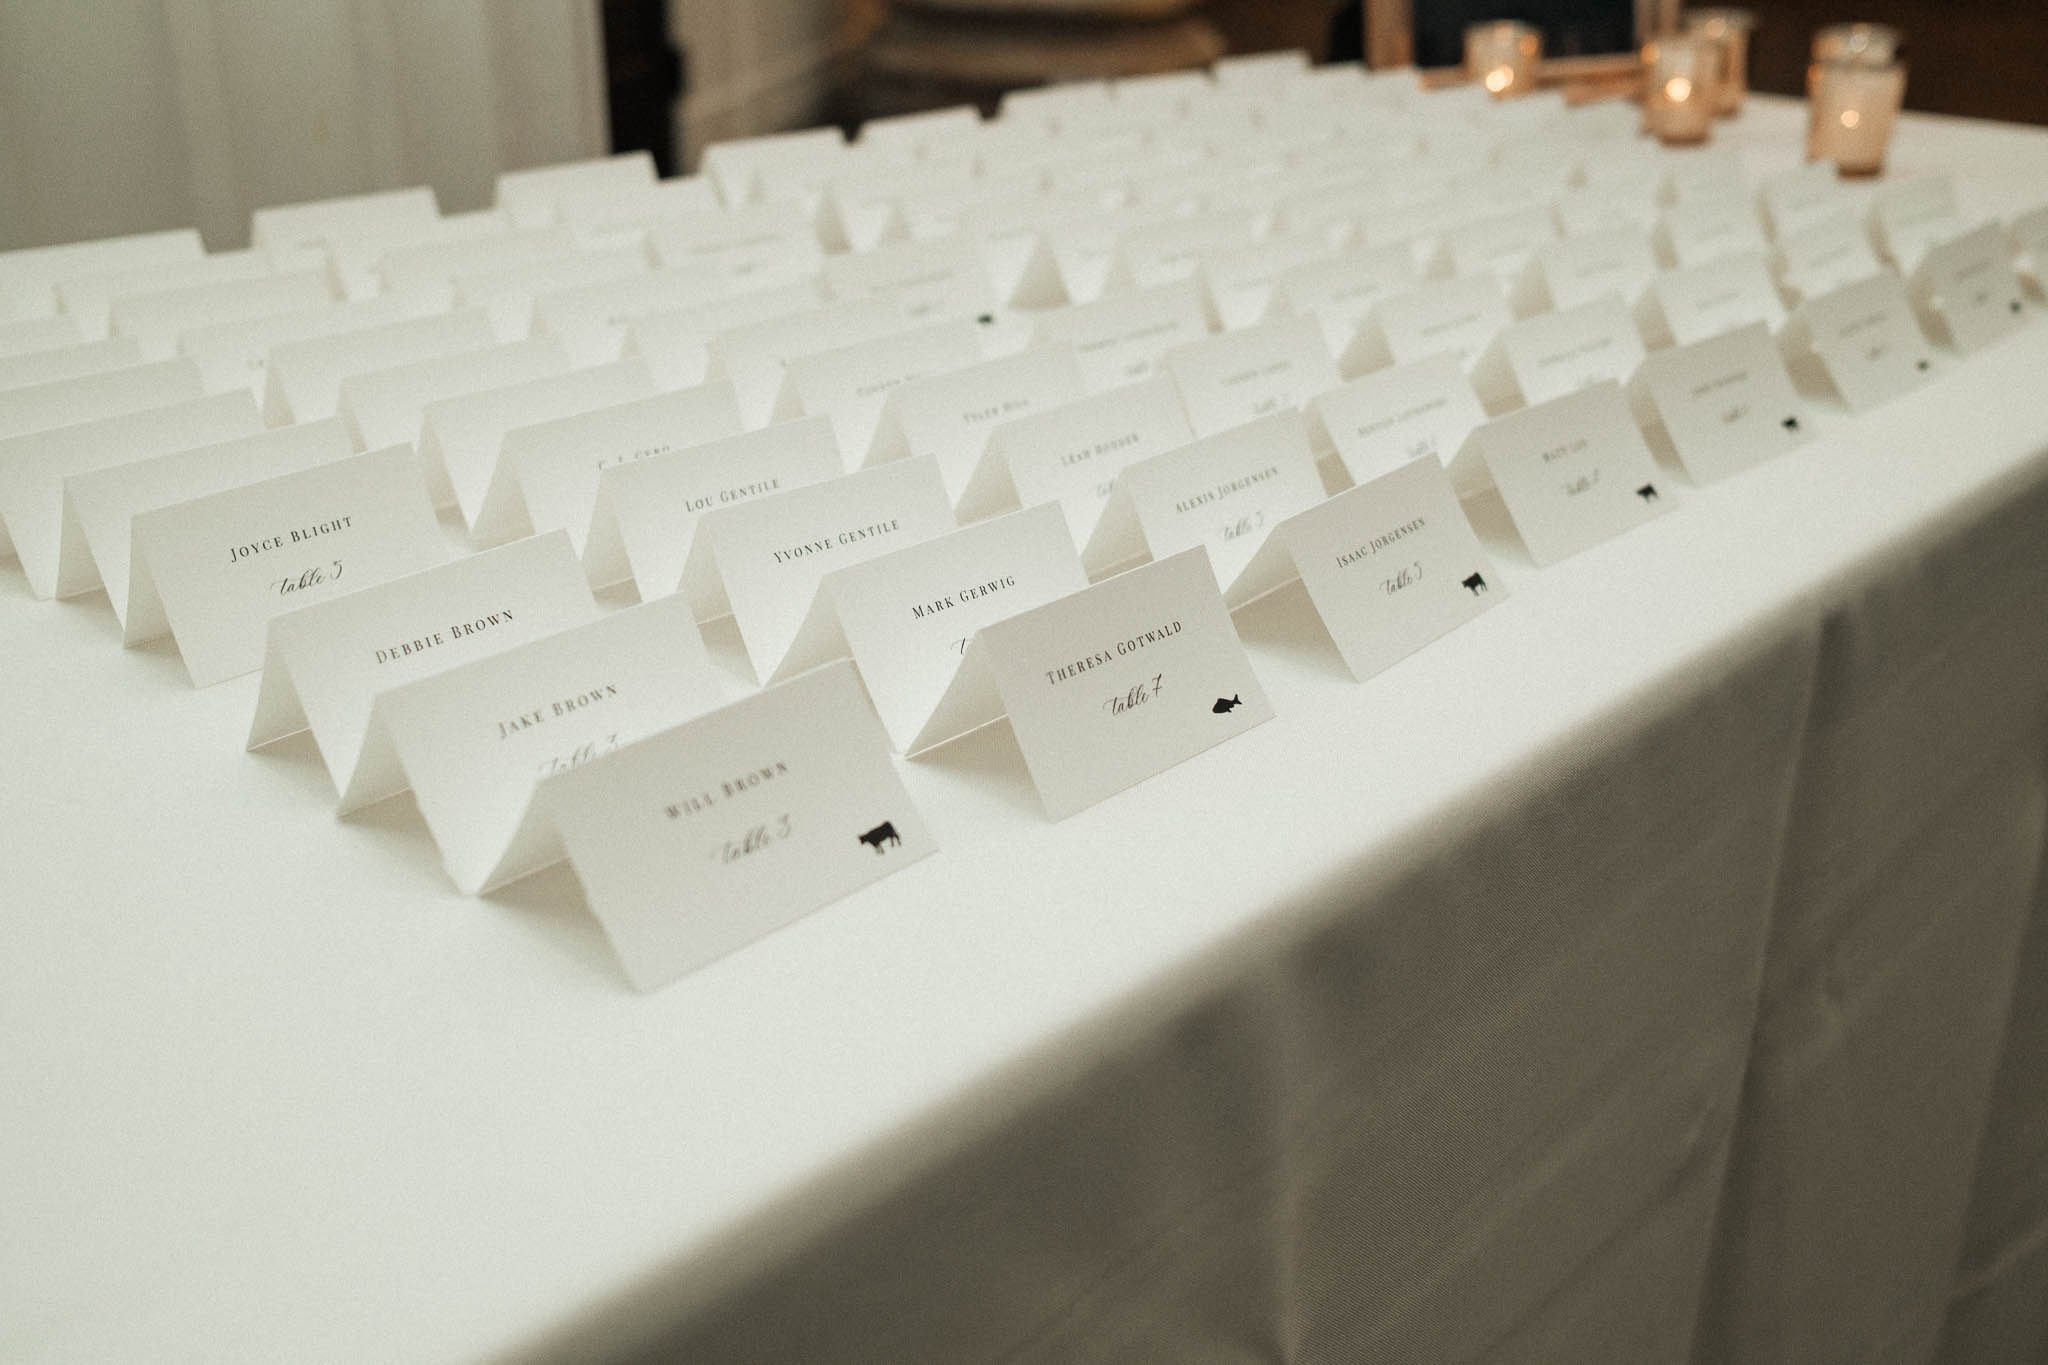  downtown pittsburgh wedding place cards 